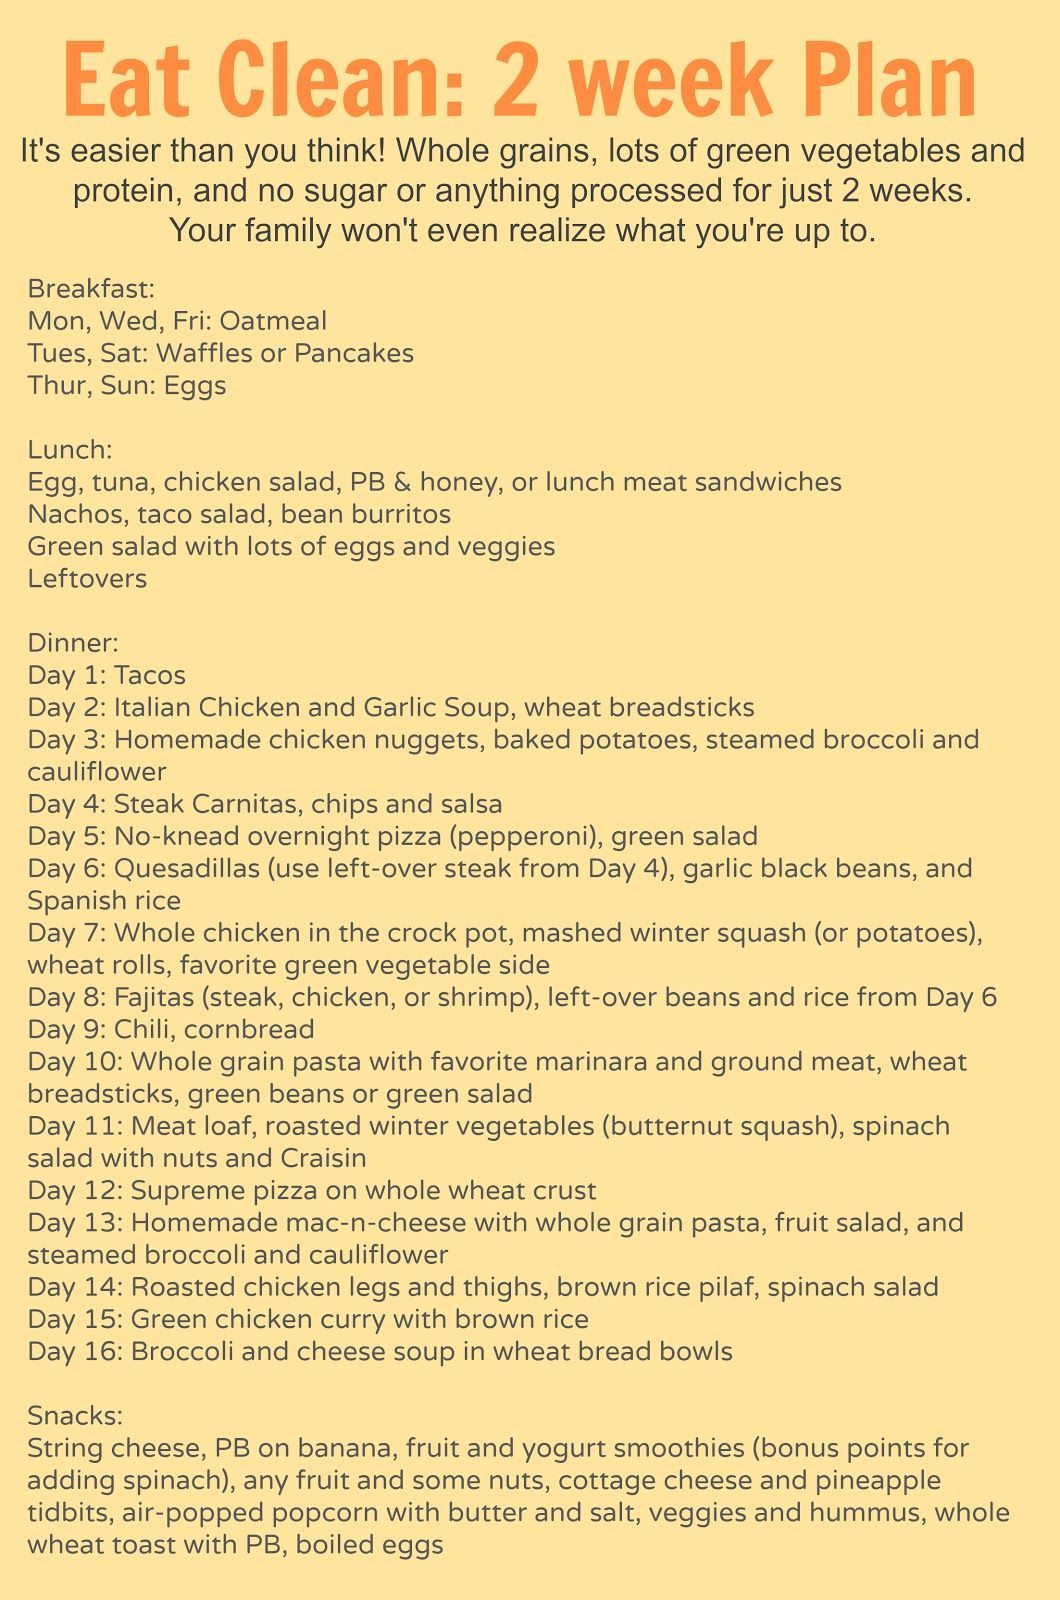 2 weeks worth of meal plans (breakfast, lunch, dinner, and snacks) with recipes